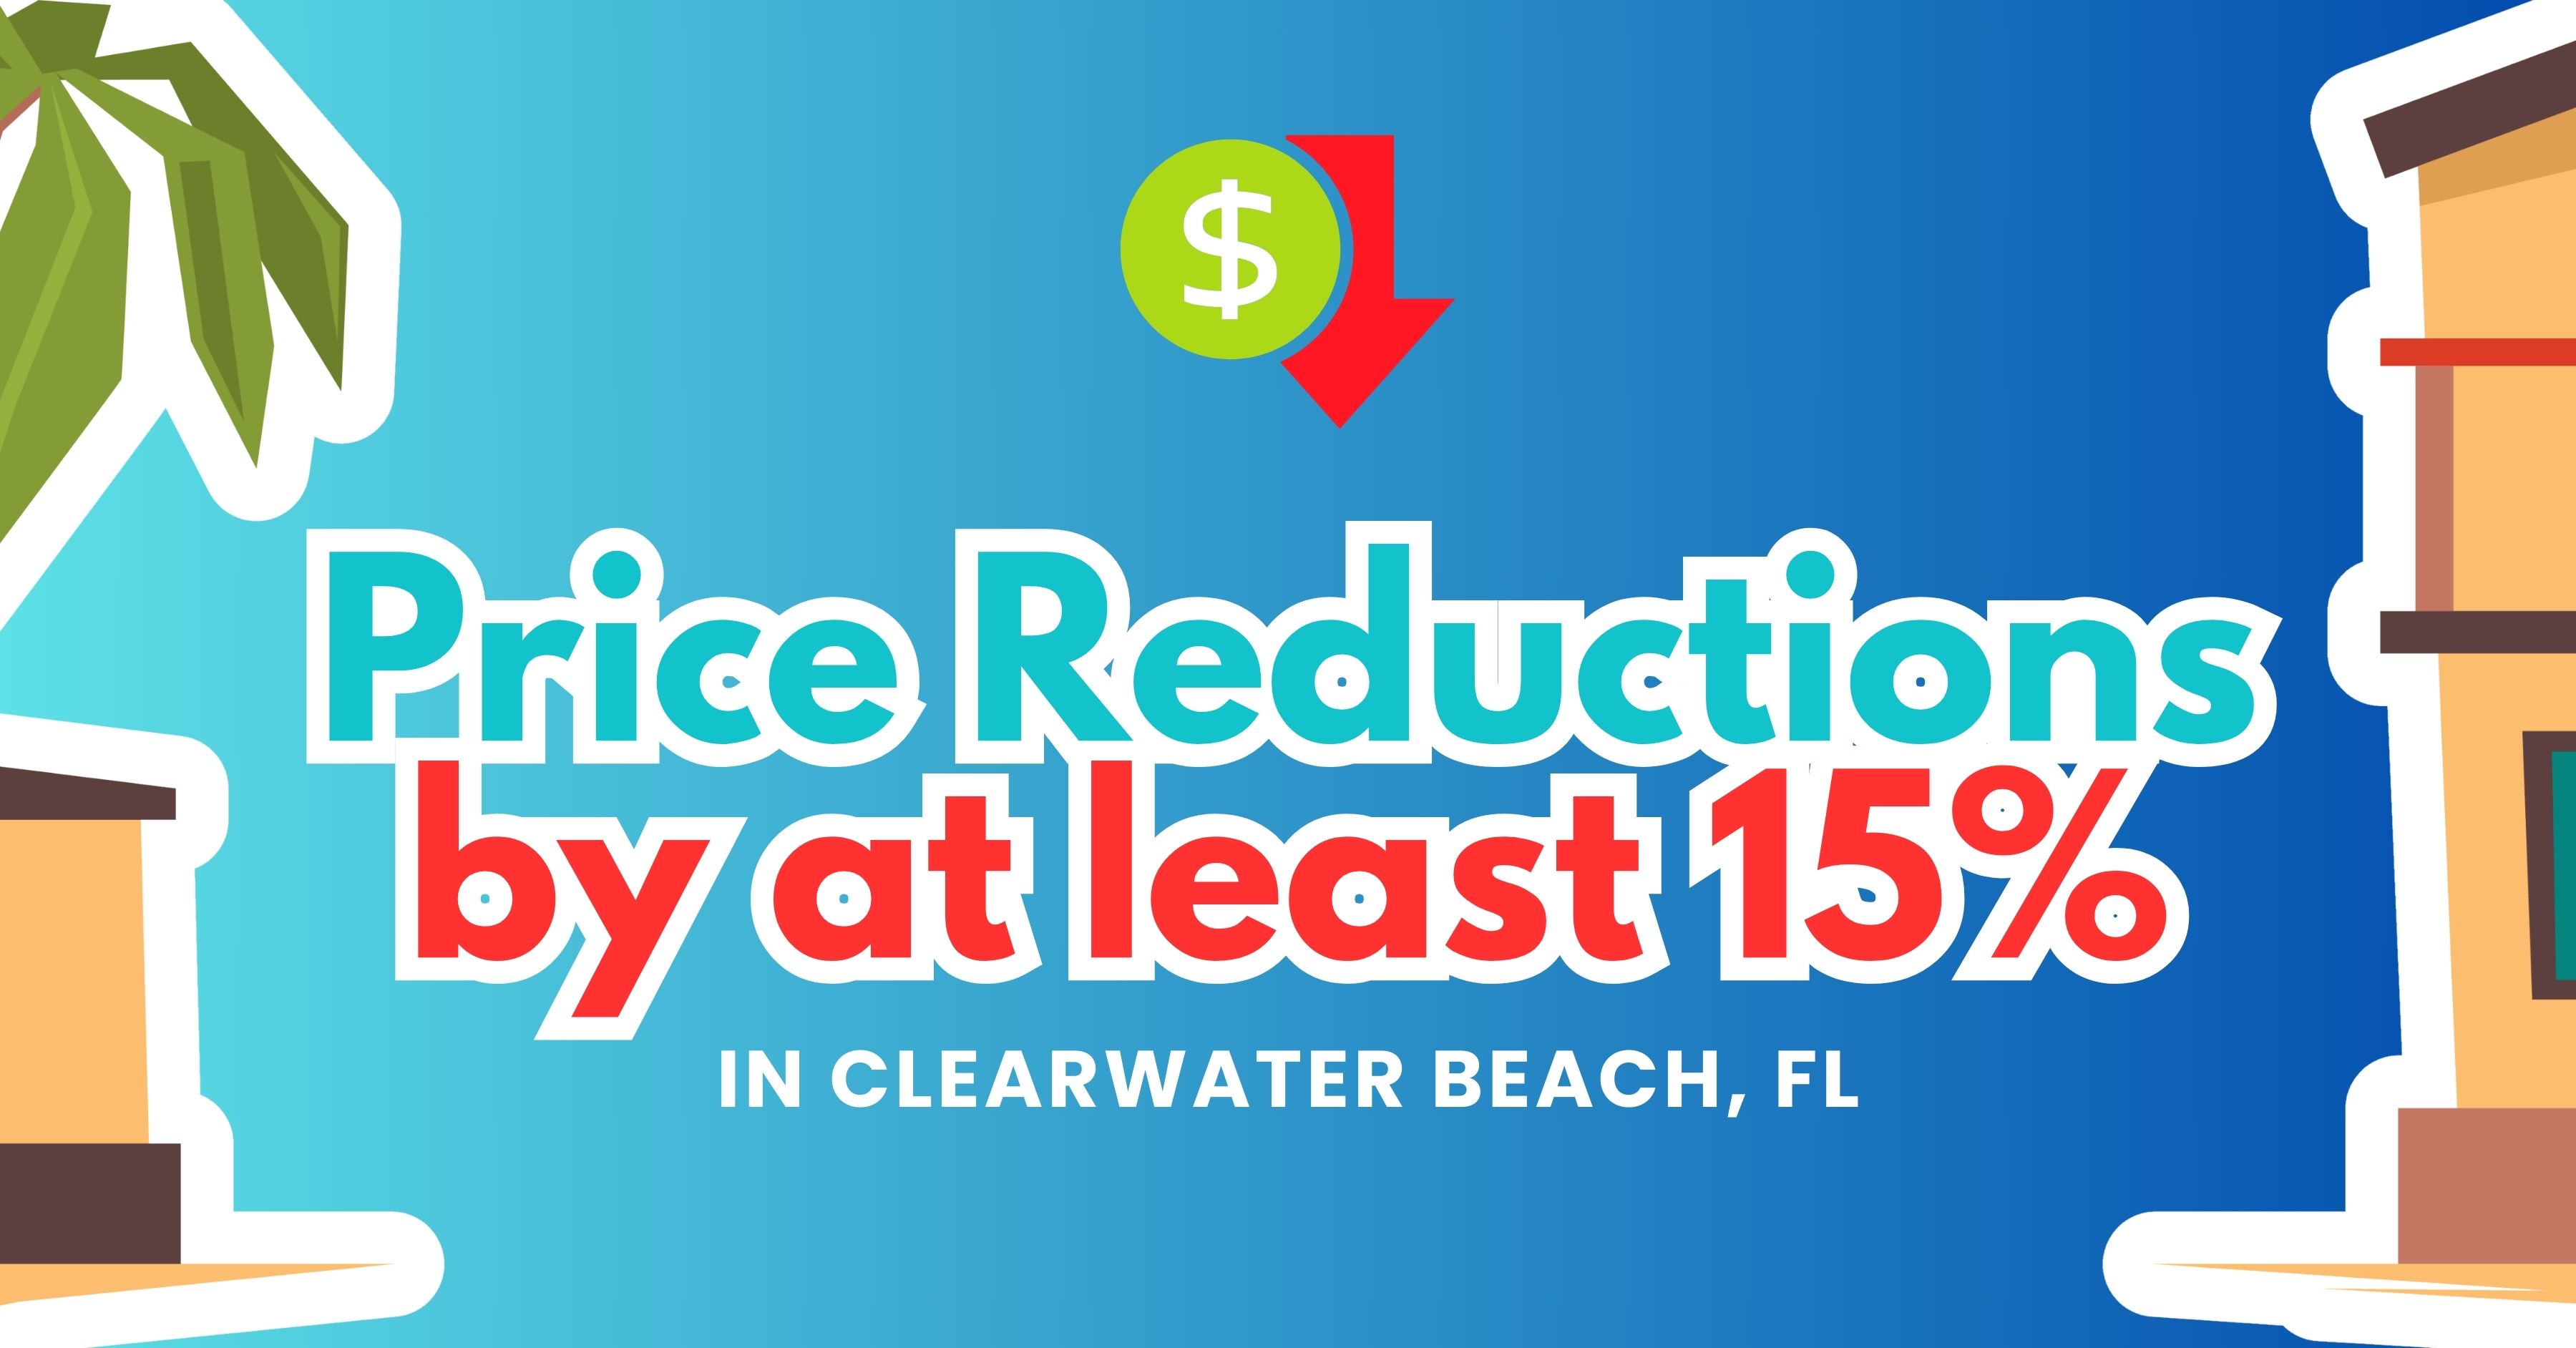 Price Reduction by at least 15% in Clearwater Beach, FL